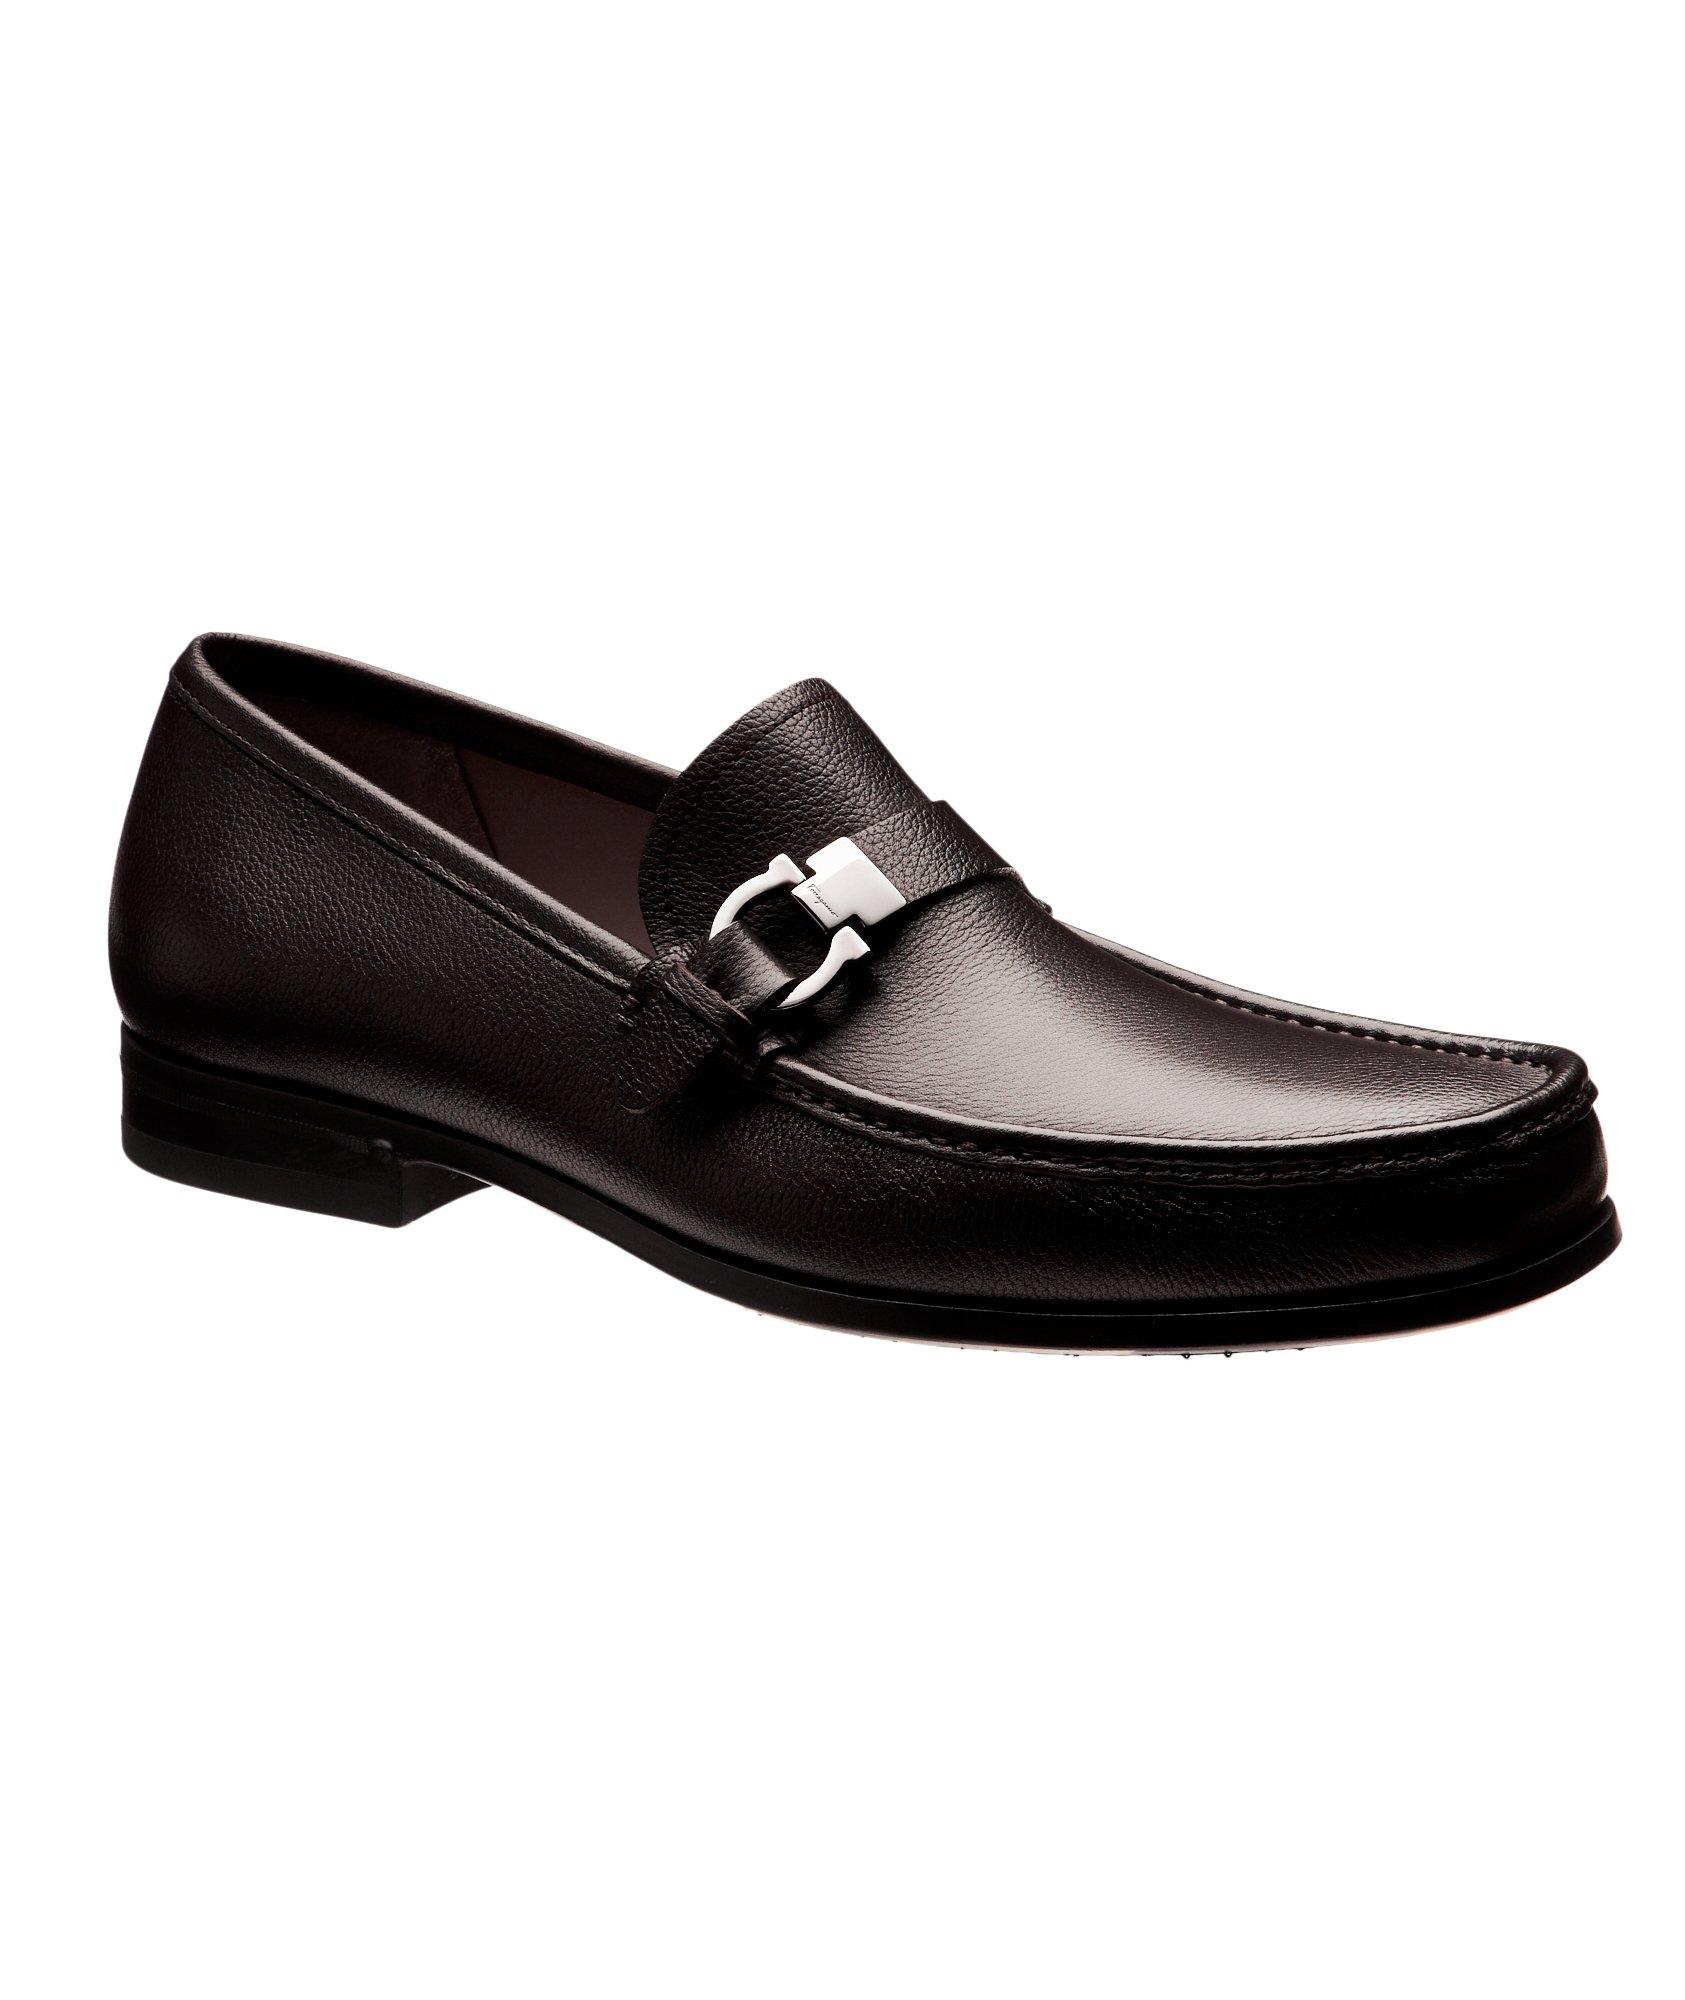 Adam Pebbled Leather Loafers image 0